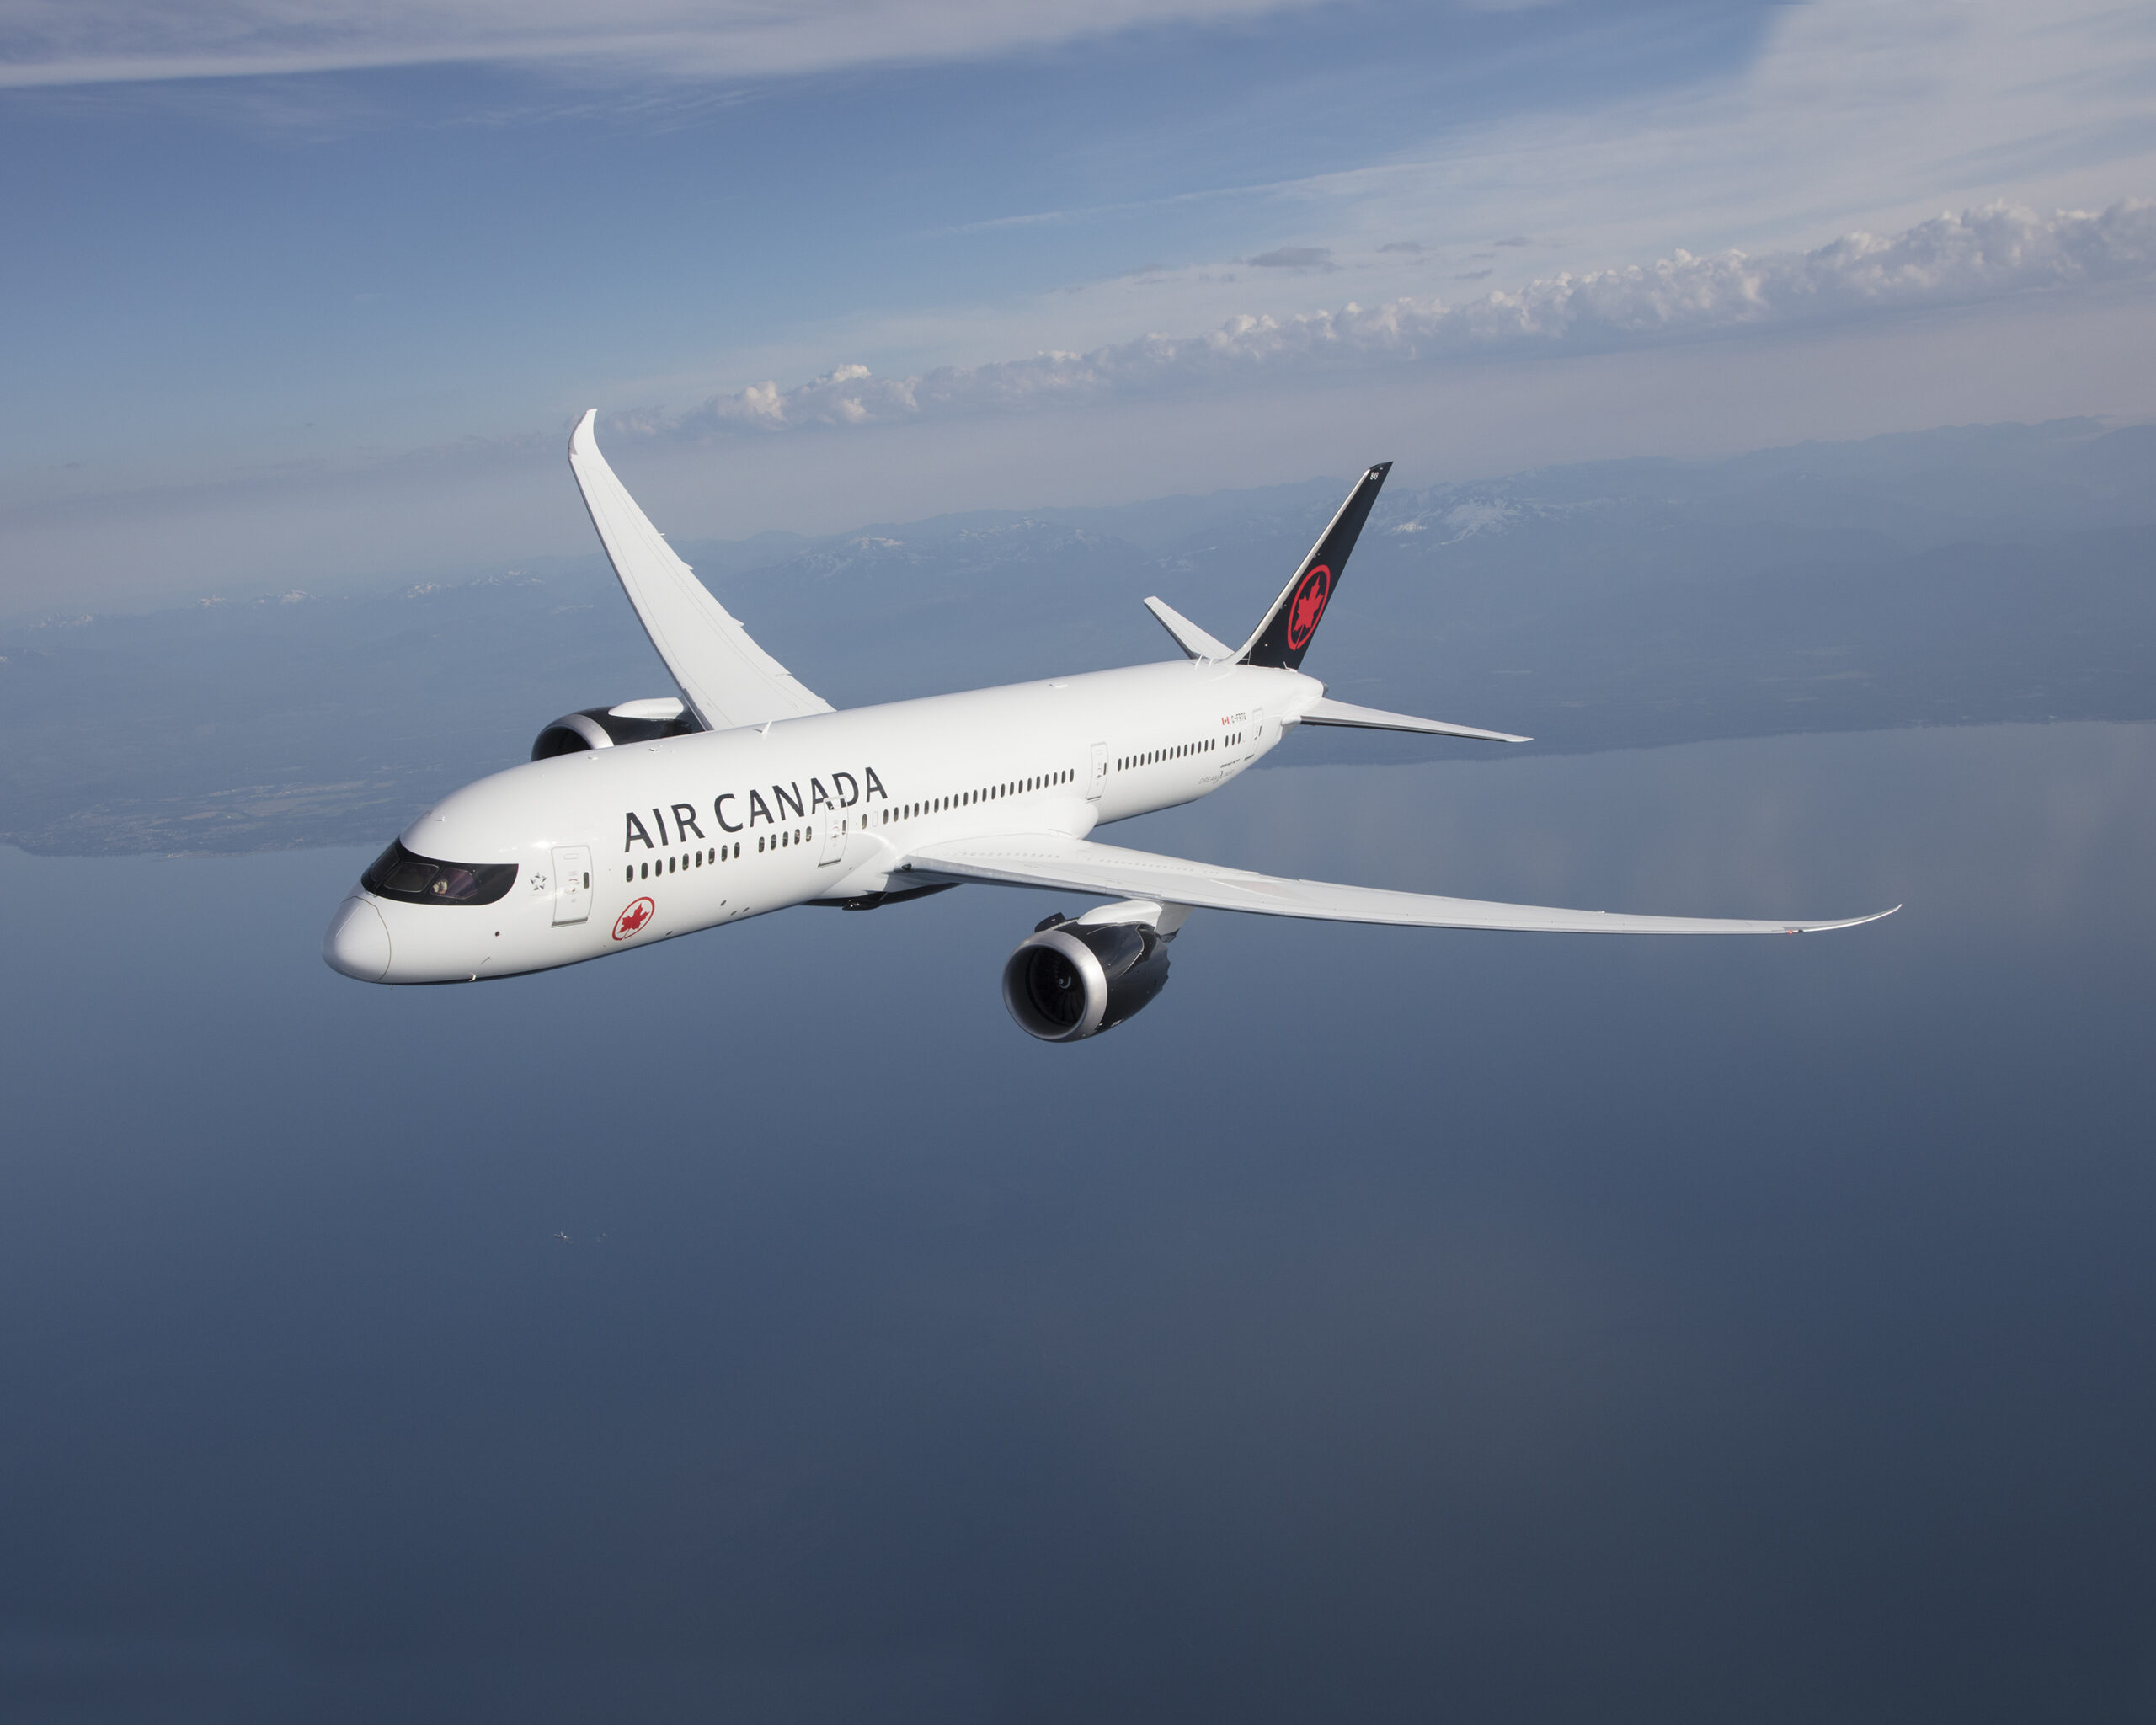 Air Canada to enhance India connections with direct Mumbai flights & Calgary-Delhi service for winter